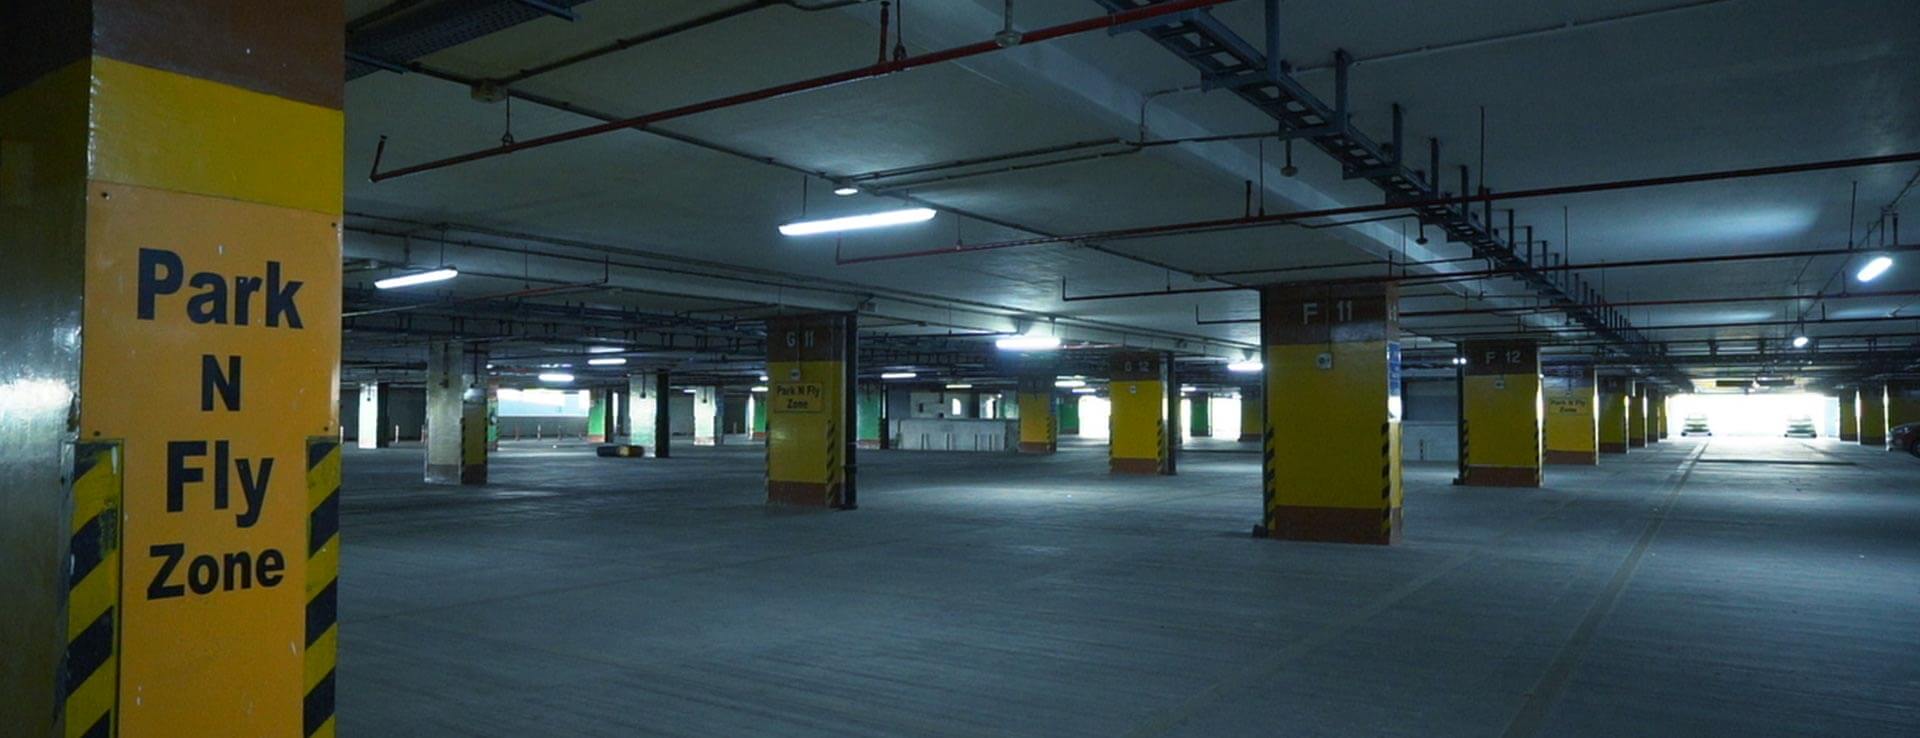 5 types of people you will meet at the Parking of Delhi Airport.